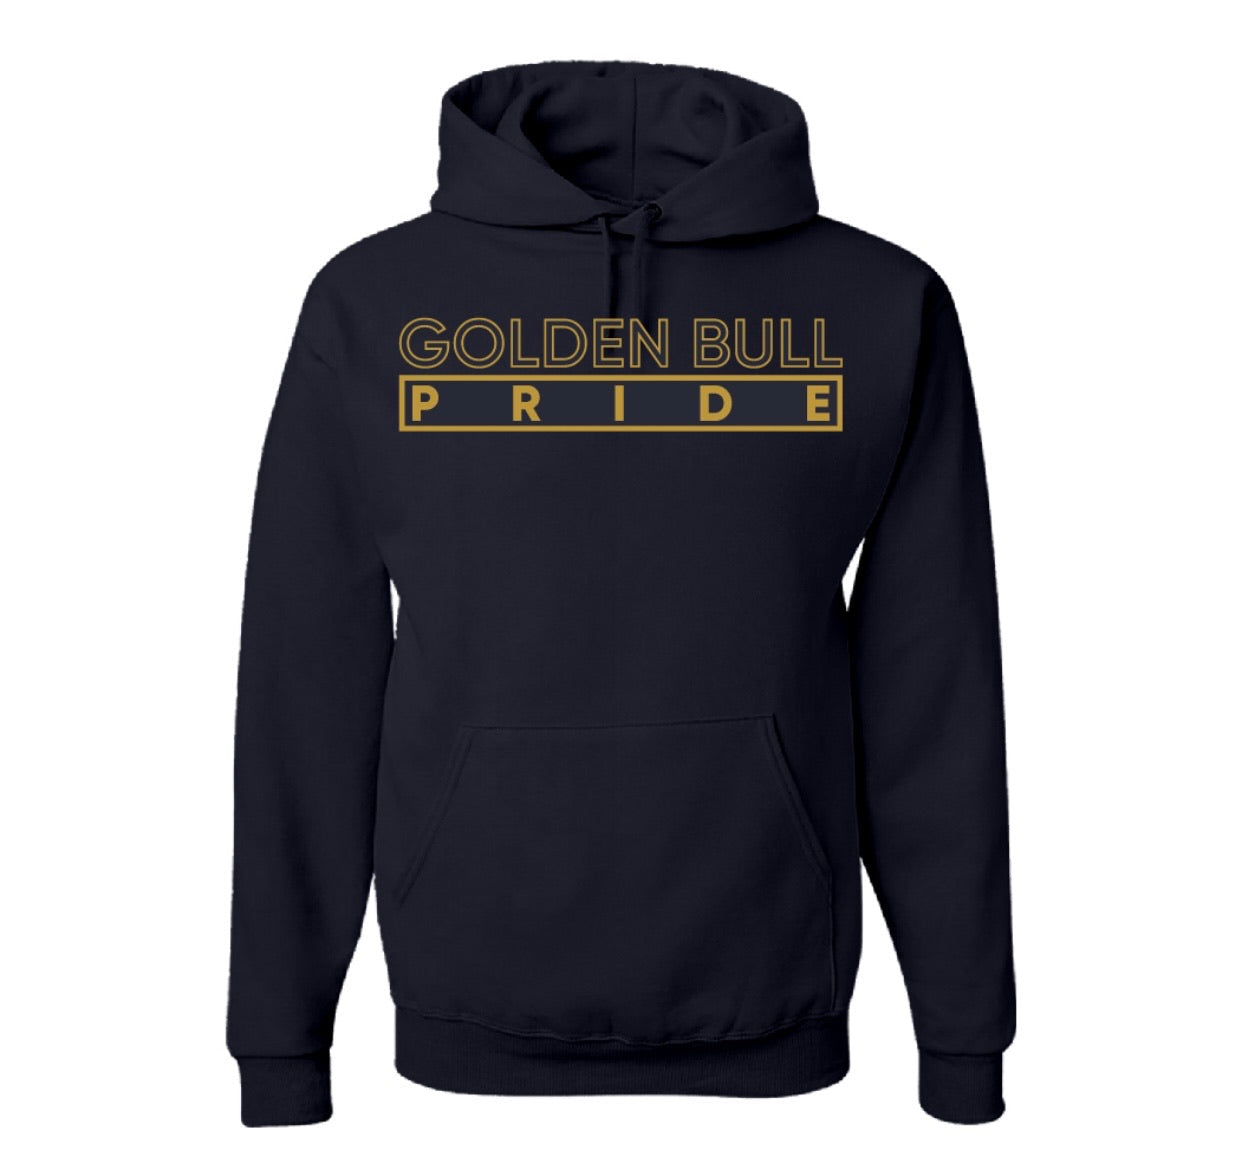 The “Golden Bull Pride” Hoodie/Crewneck in Navy Blue/Gold (NC)